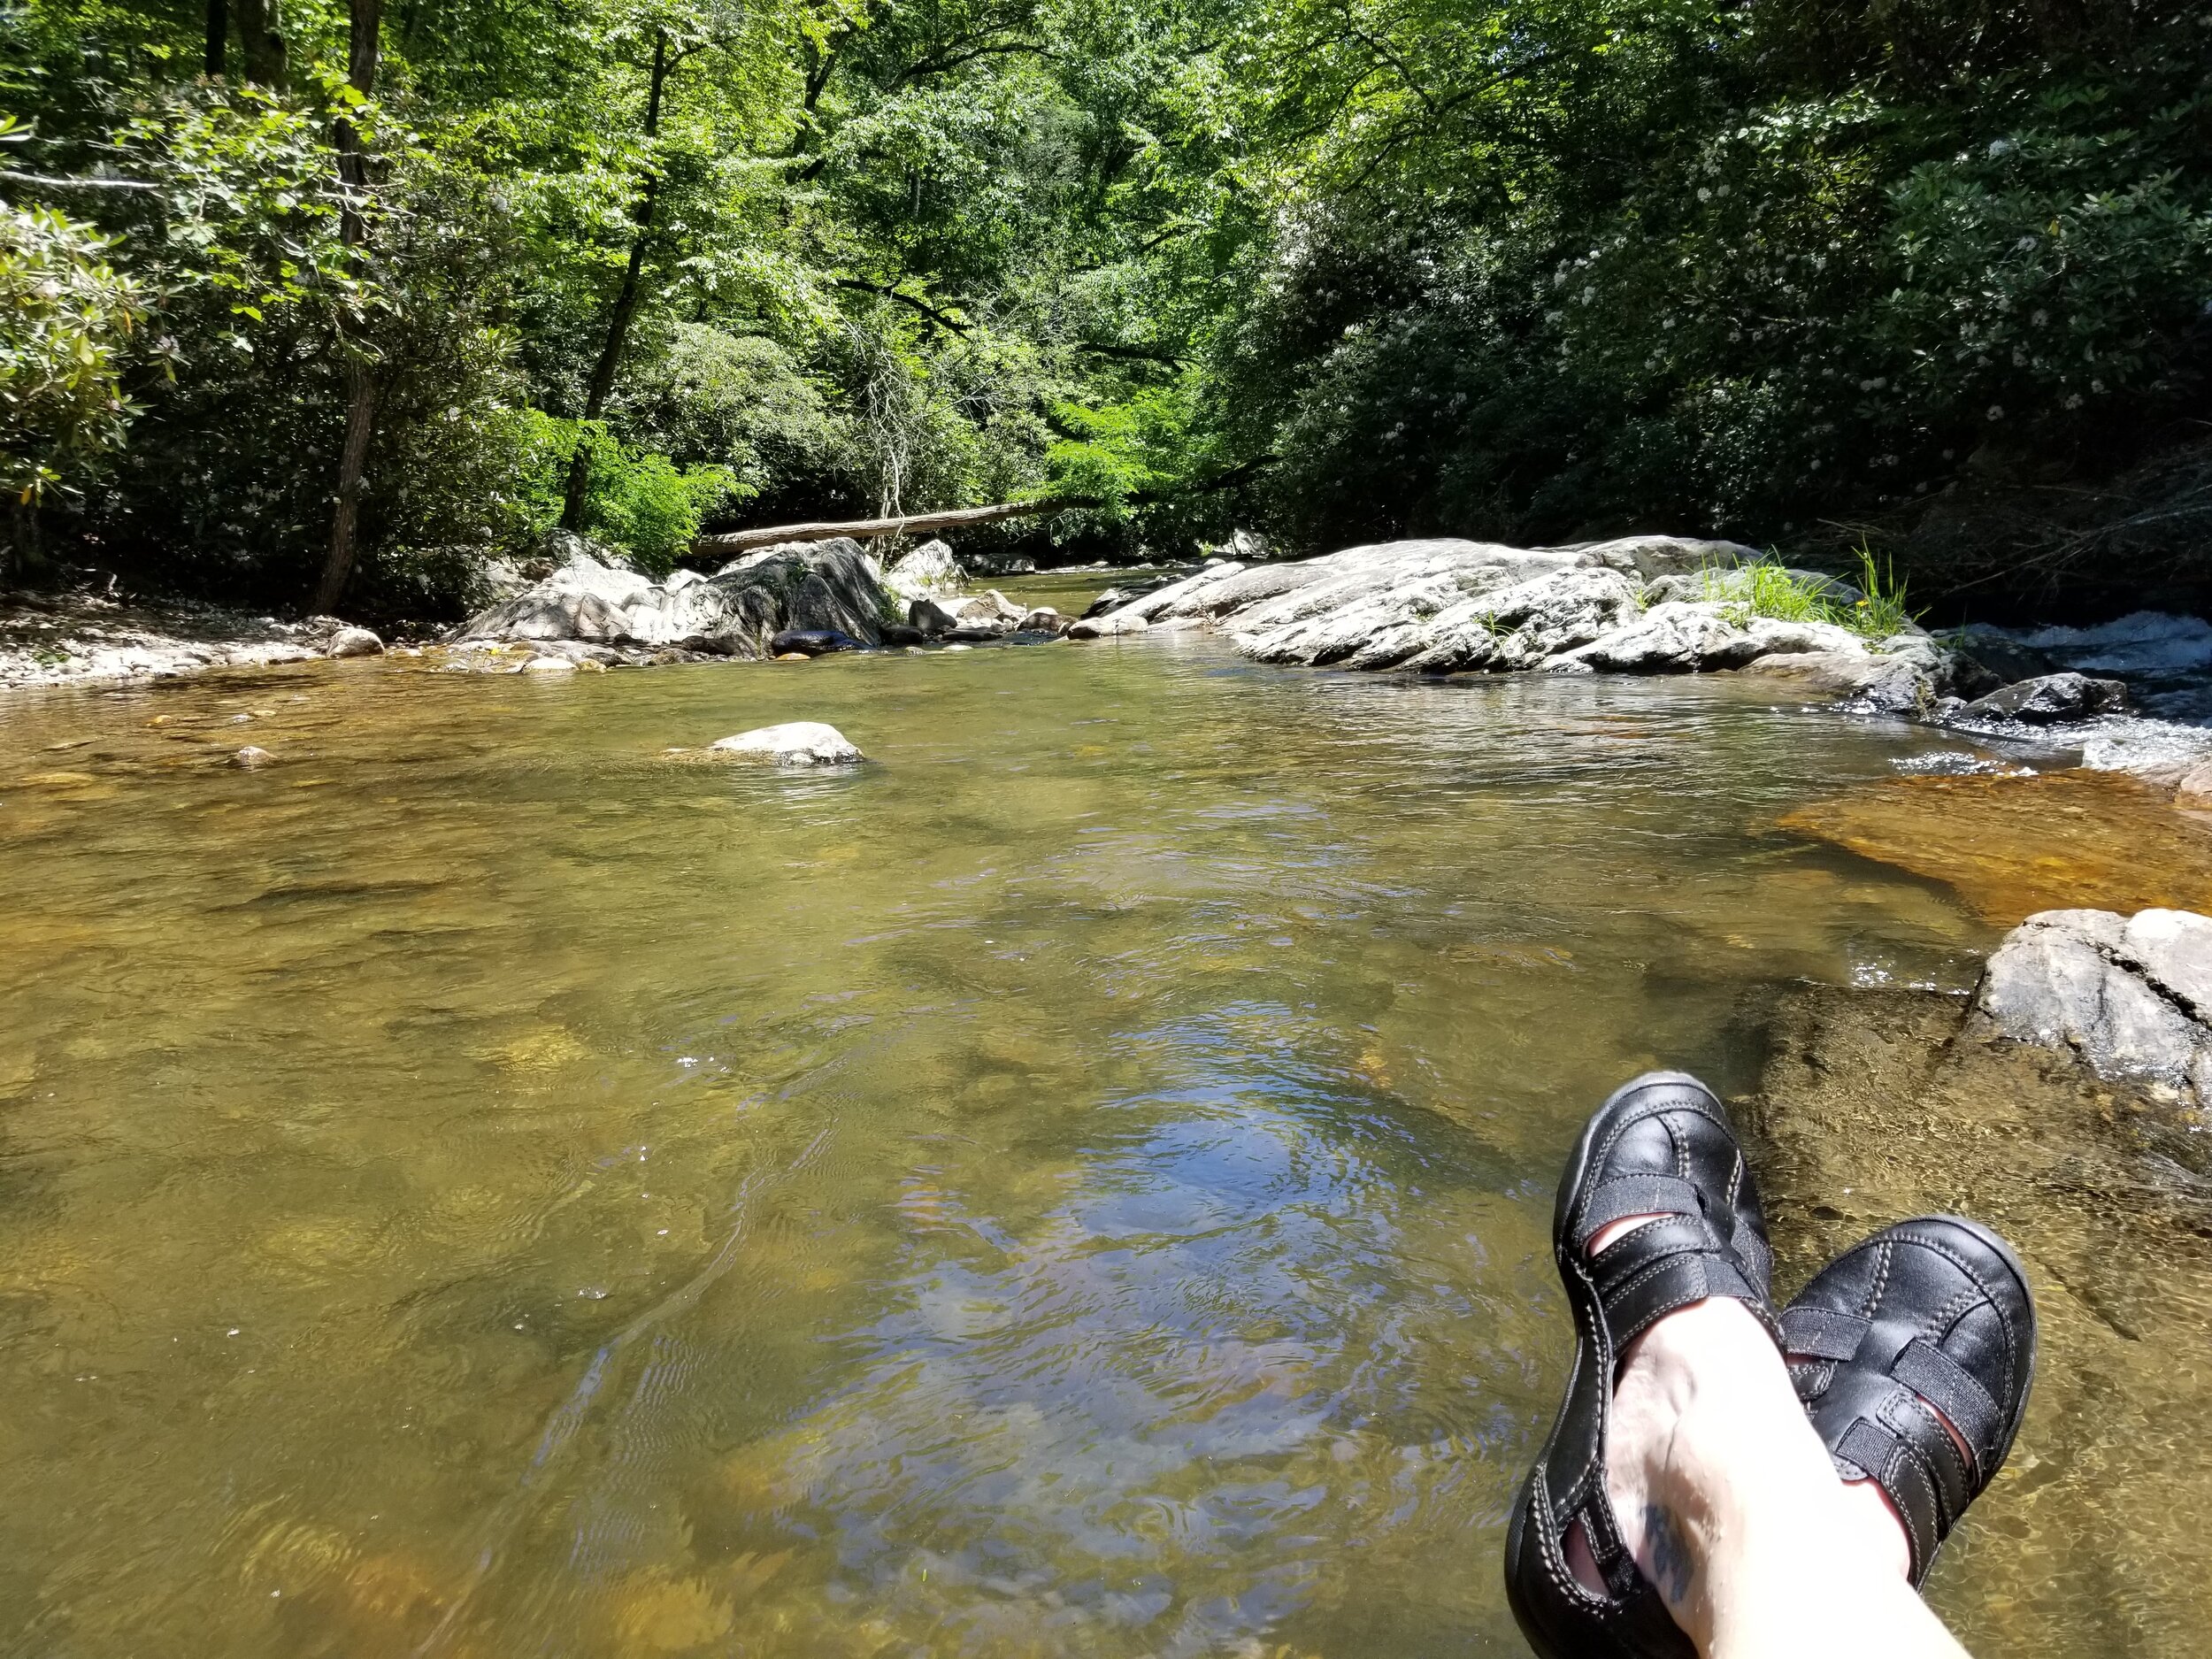 North Mills River, Pisgah National Forest, NC